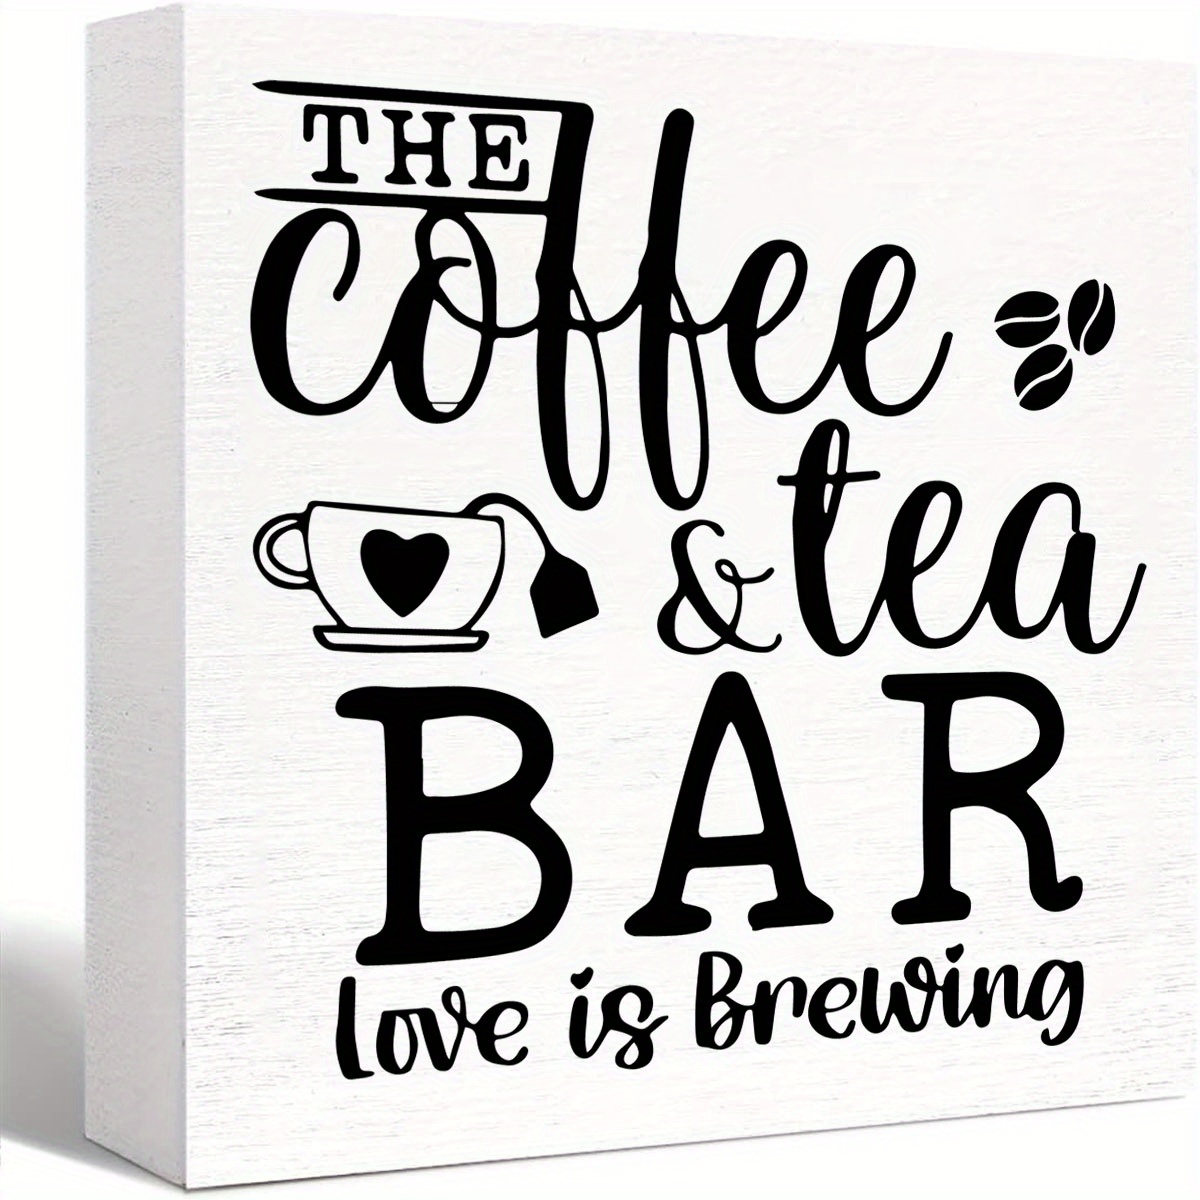 

1pc The Coffee And Tea Bar Love Is Brewing Wood Box Sign, Desk Decor, Rustic Wooden Block Sign Decorations For Home Kitchen Office Coffee And Tea Bar Wall Tabletop Shelf Decor